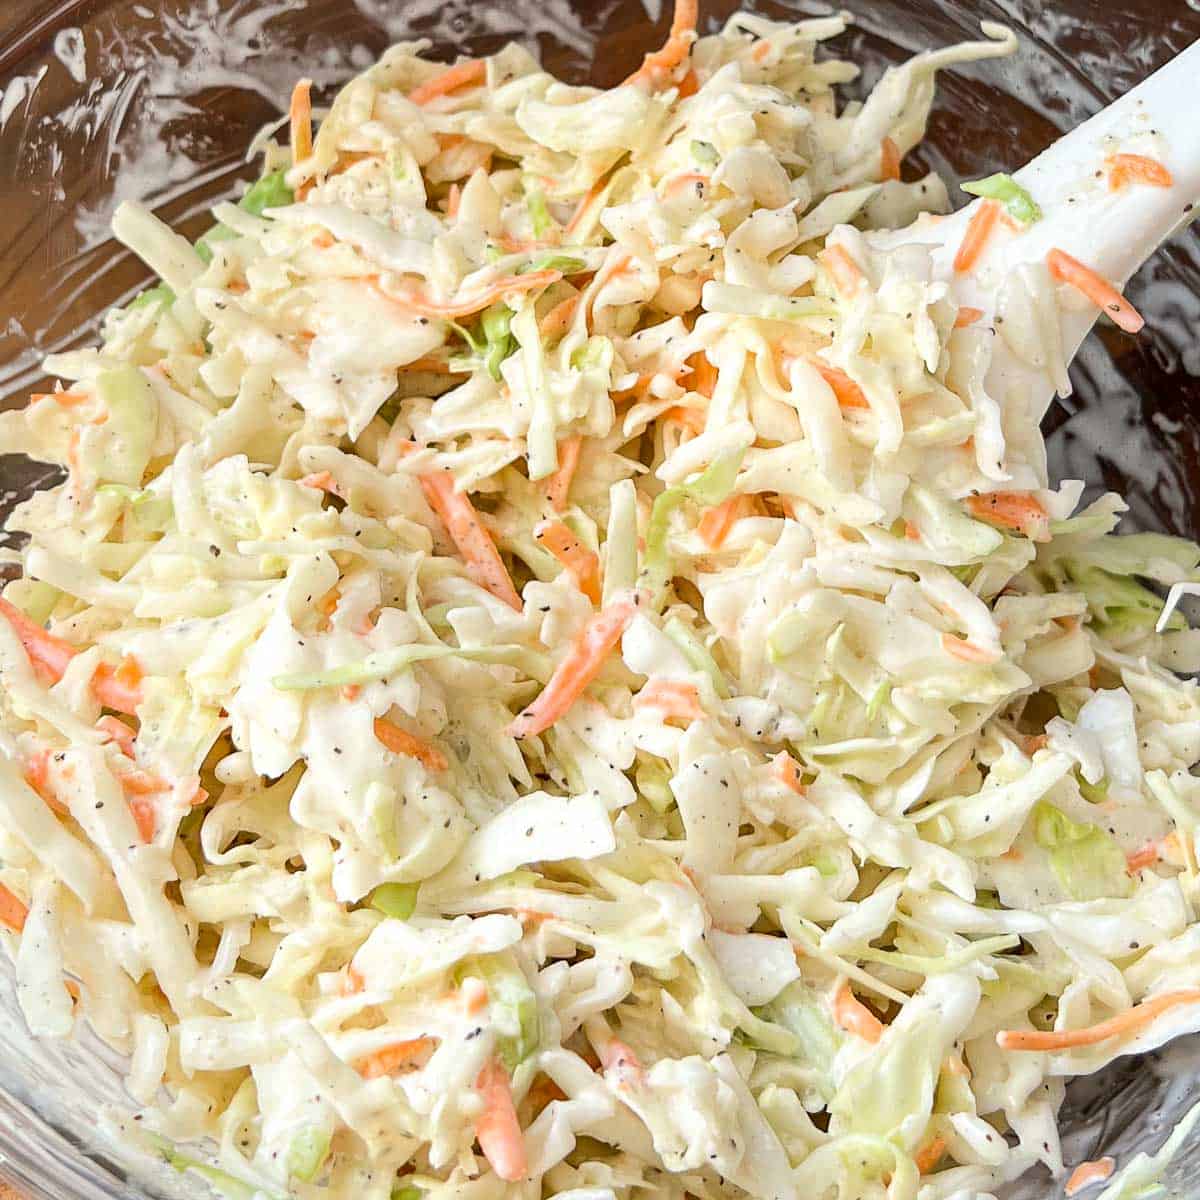 Coleslaw mixed together in a glass bowl with a white rubber spatula in bowl..